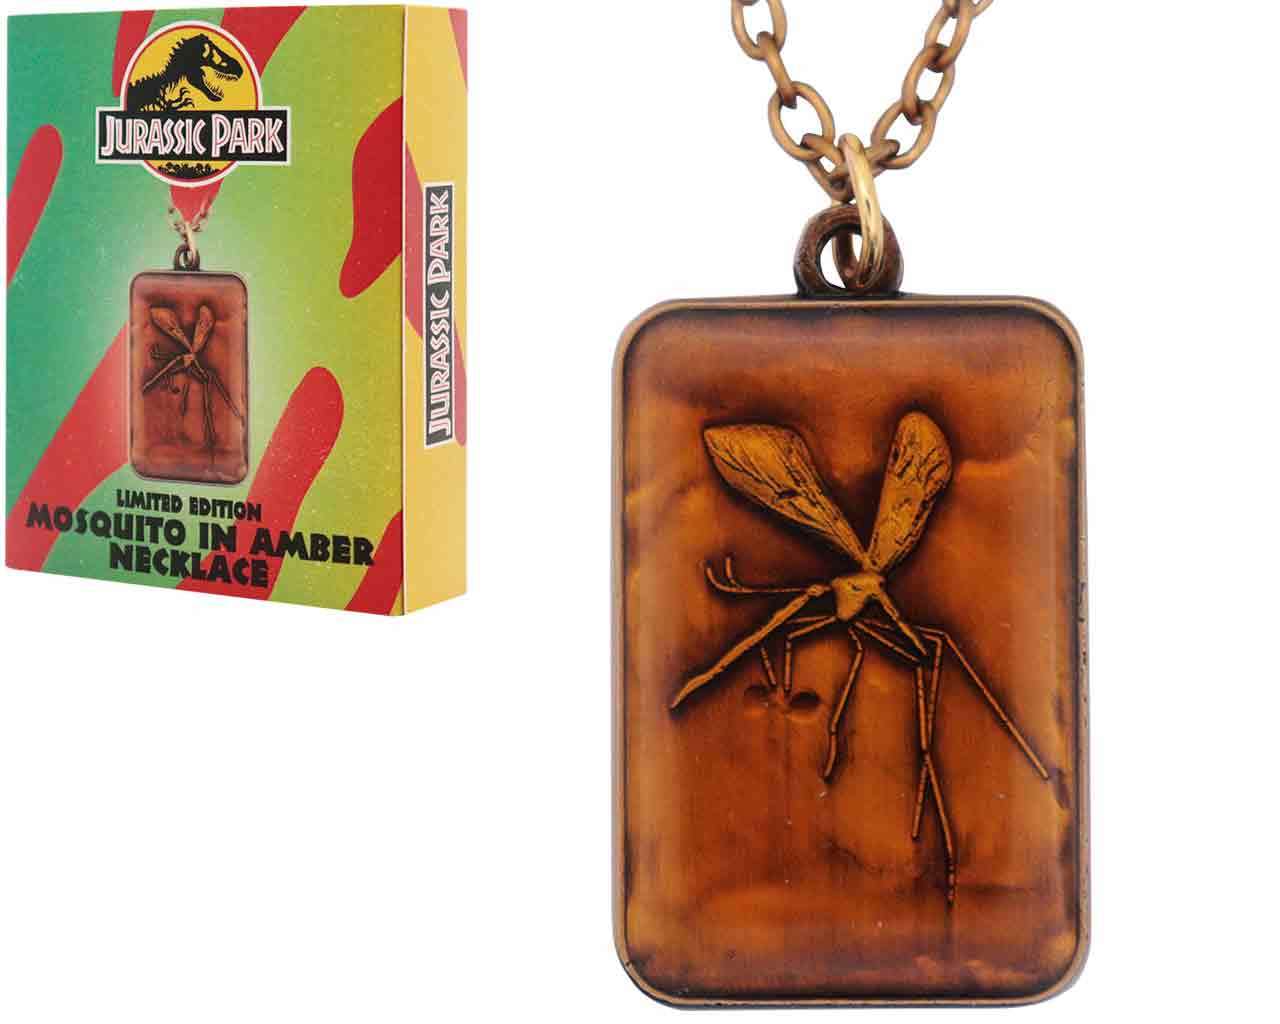 Jurassic Park Limited Edition Unisex Amber Necklace | Jewellery | Free  shipping over £20 | HMV Store